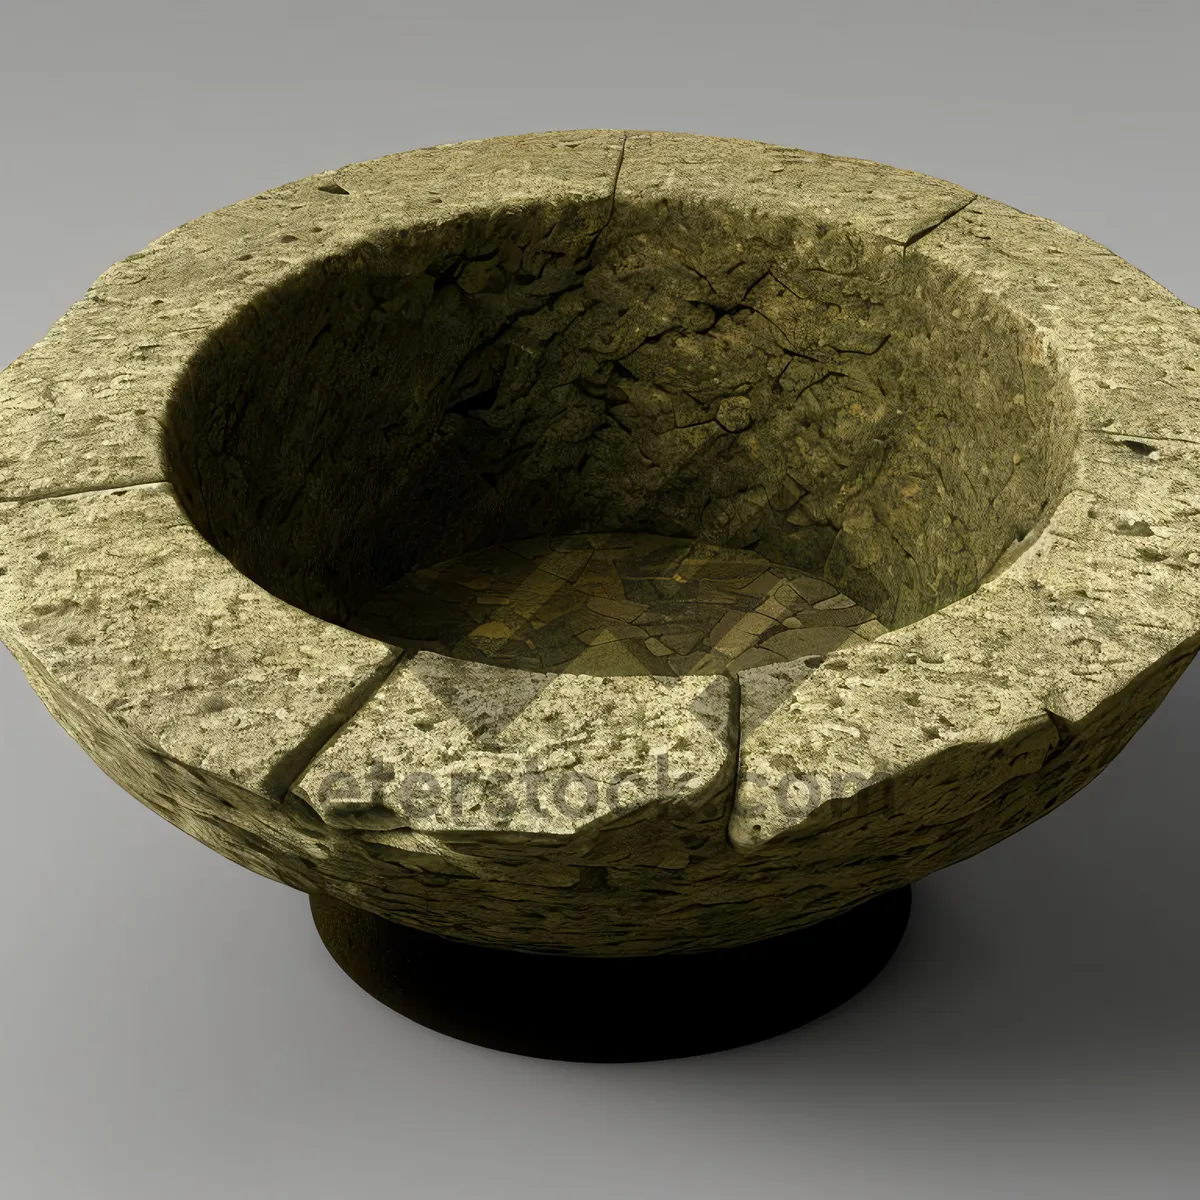 Picture of Harmonious Balance: Stone Mortar and Pestle Spa